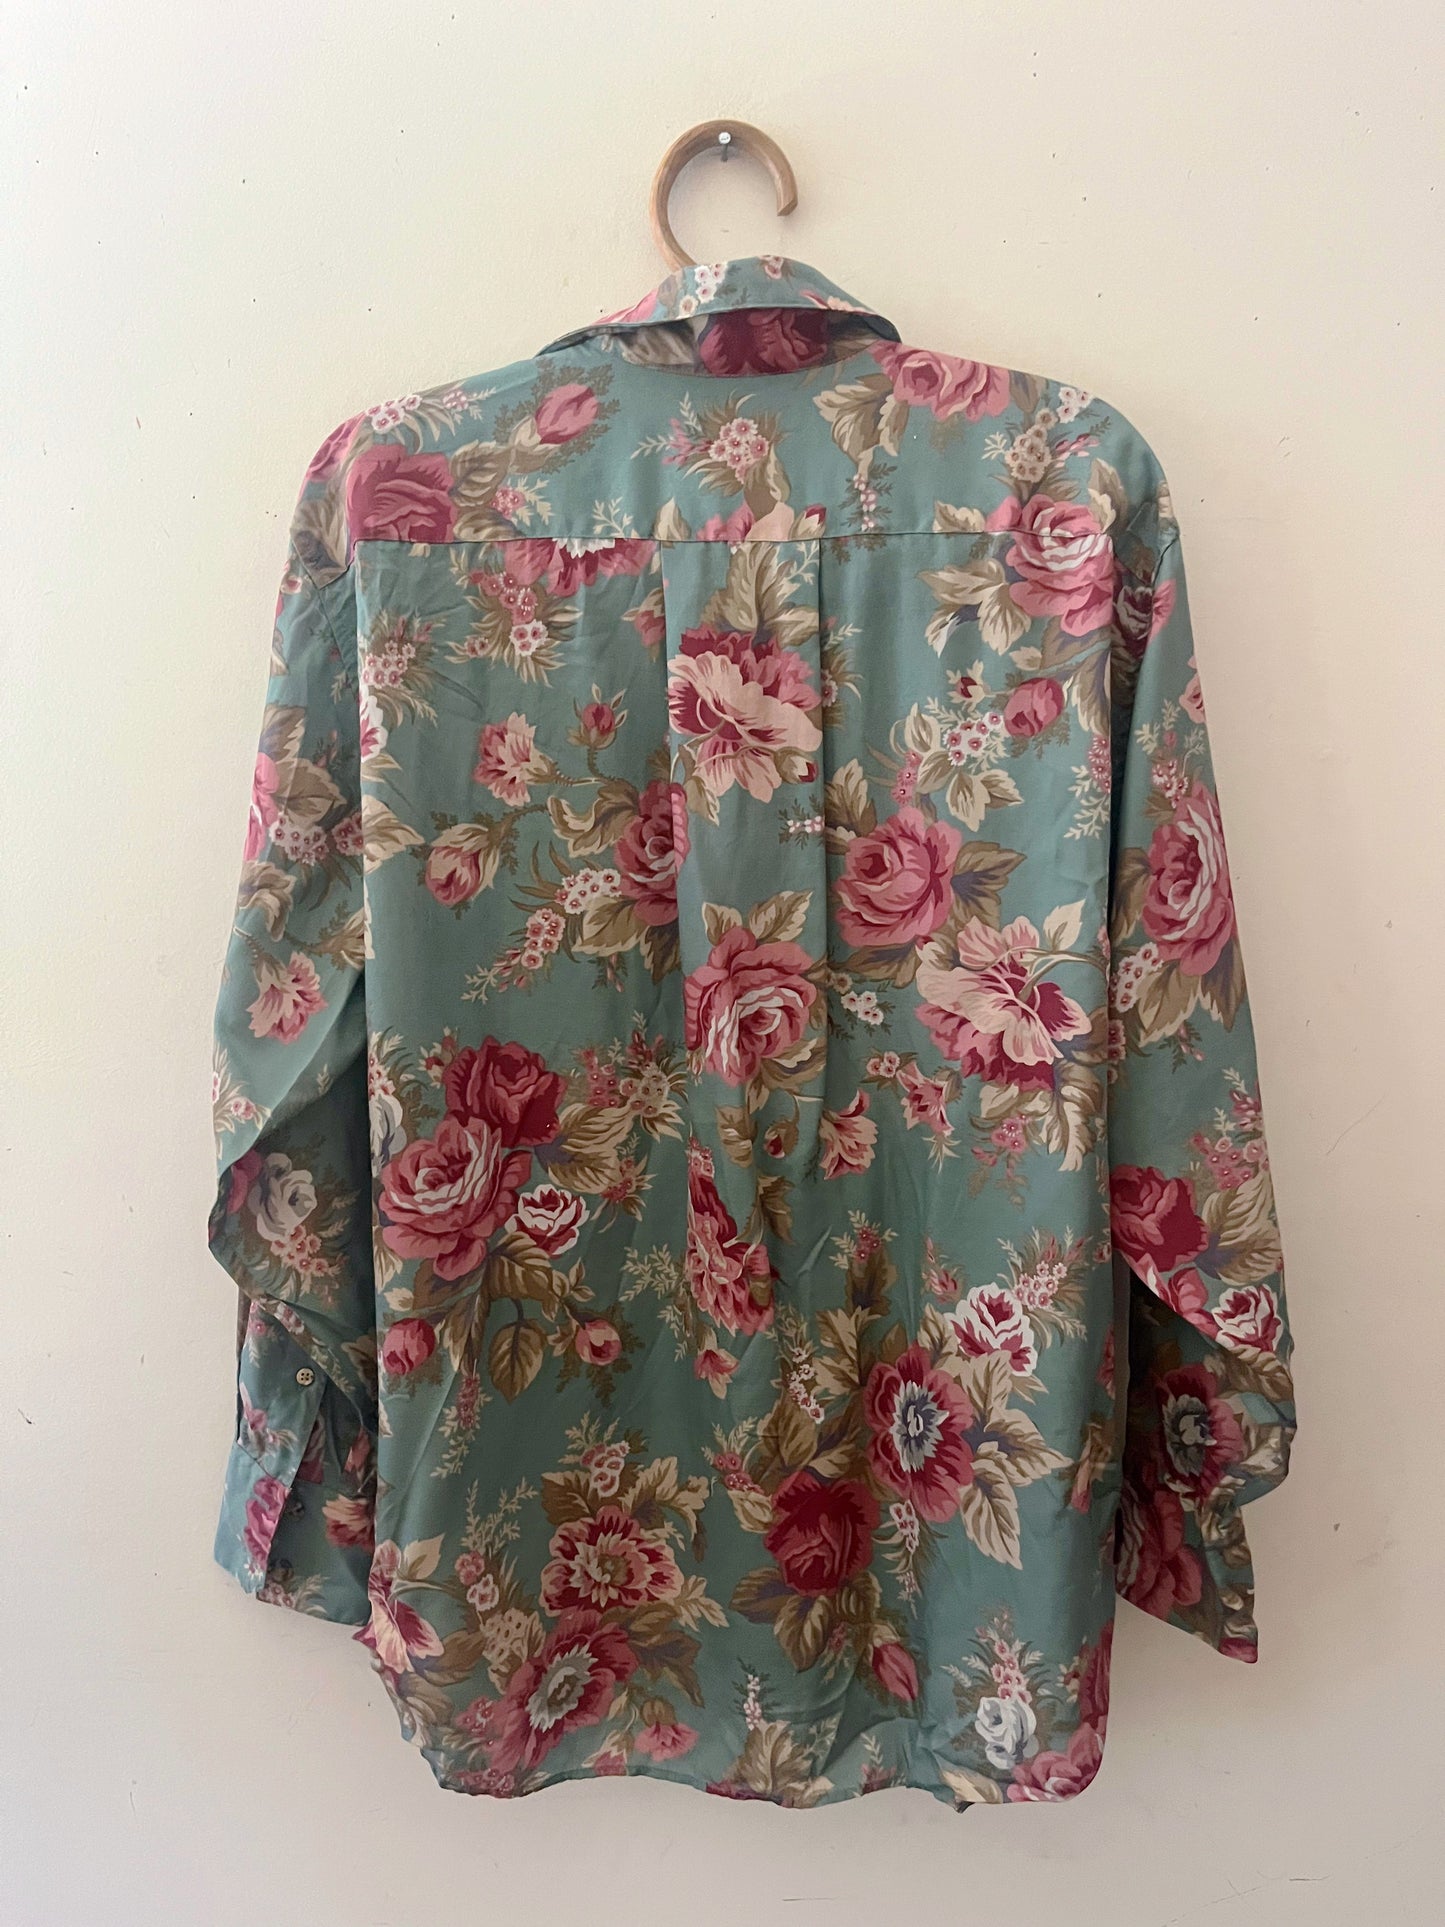 Muted Turquoise Floral Top